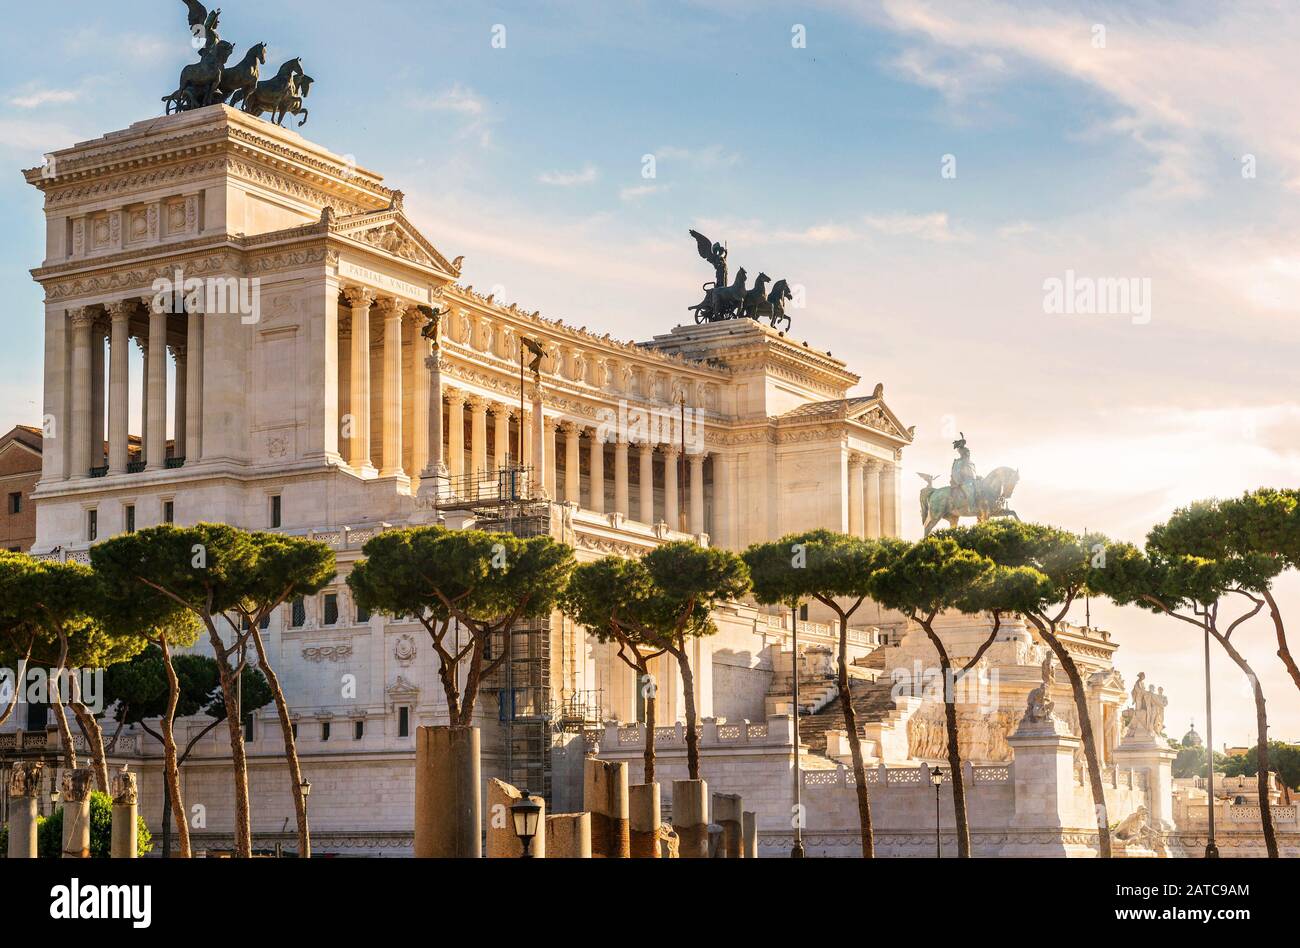 ROME, ITALY - MAY 8, 2014: The Altare della Patria also known as National Monument to Victor Emmanuel II or 'Il Vittoriano'. It is a monument built in Stock Photo